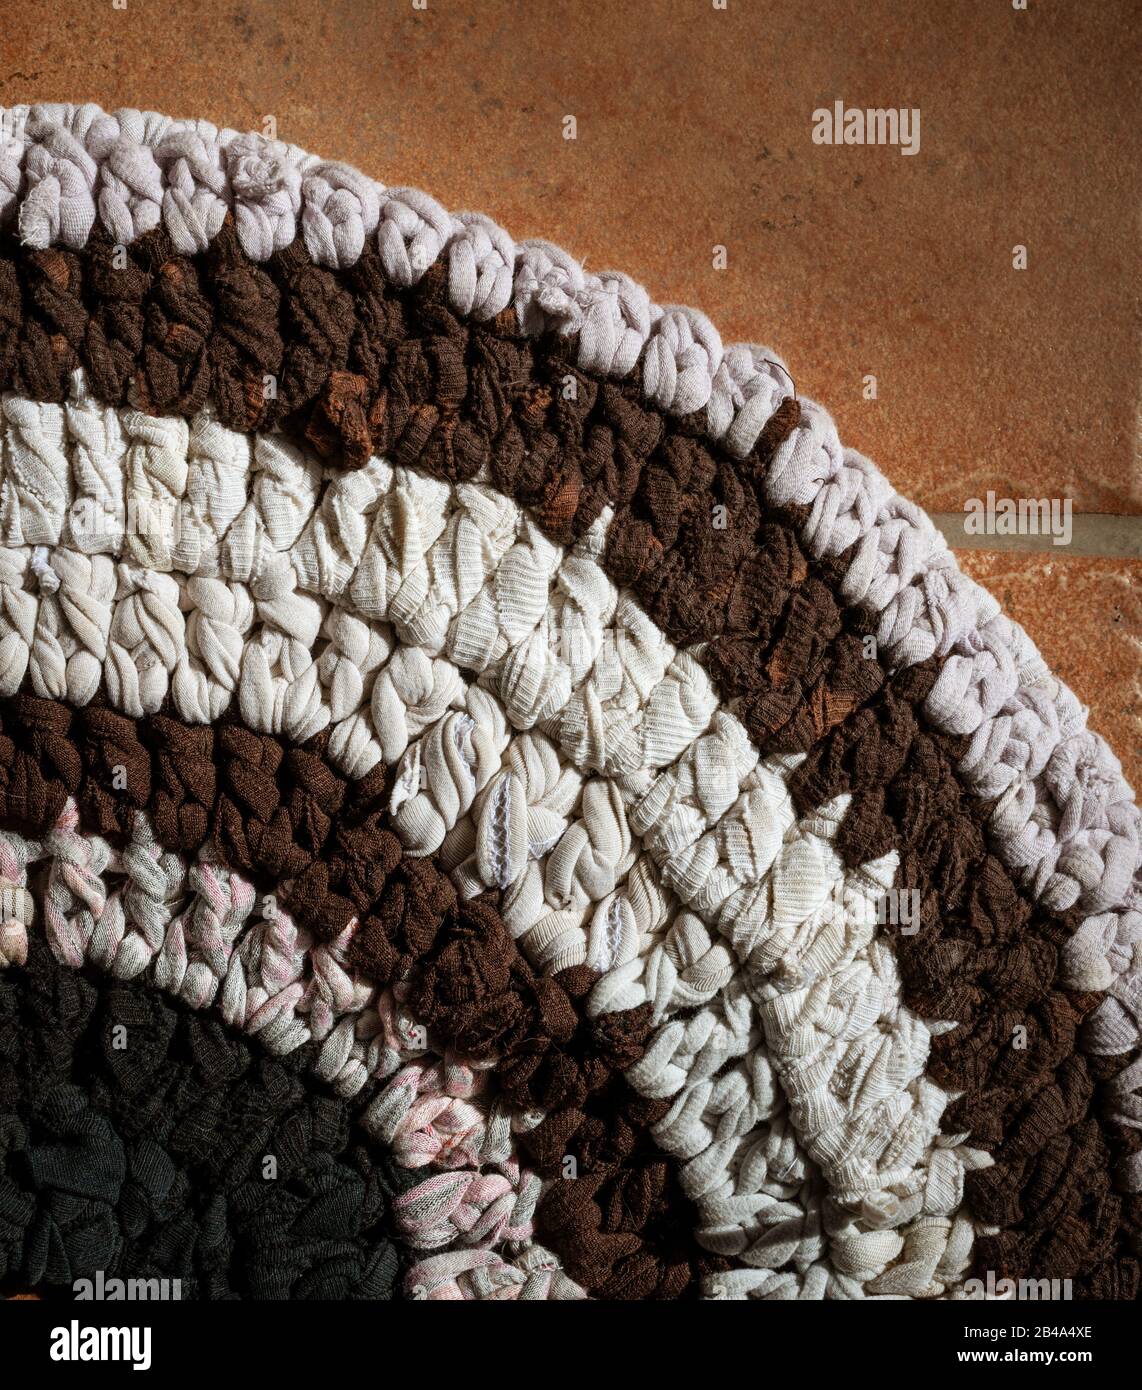 white  brown and black rag rug made from tshirt thread. on tiled floor. Stock Photo